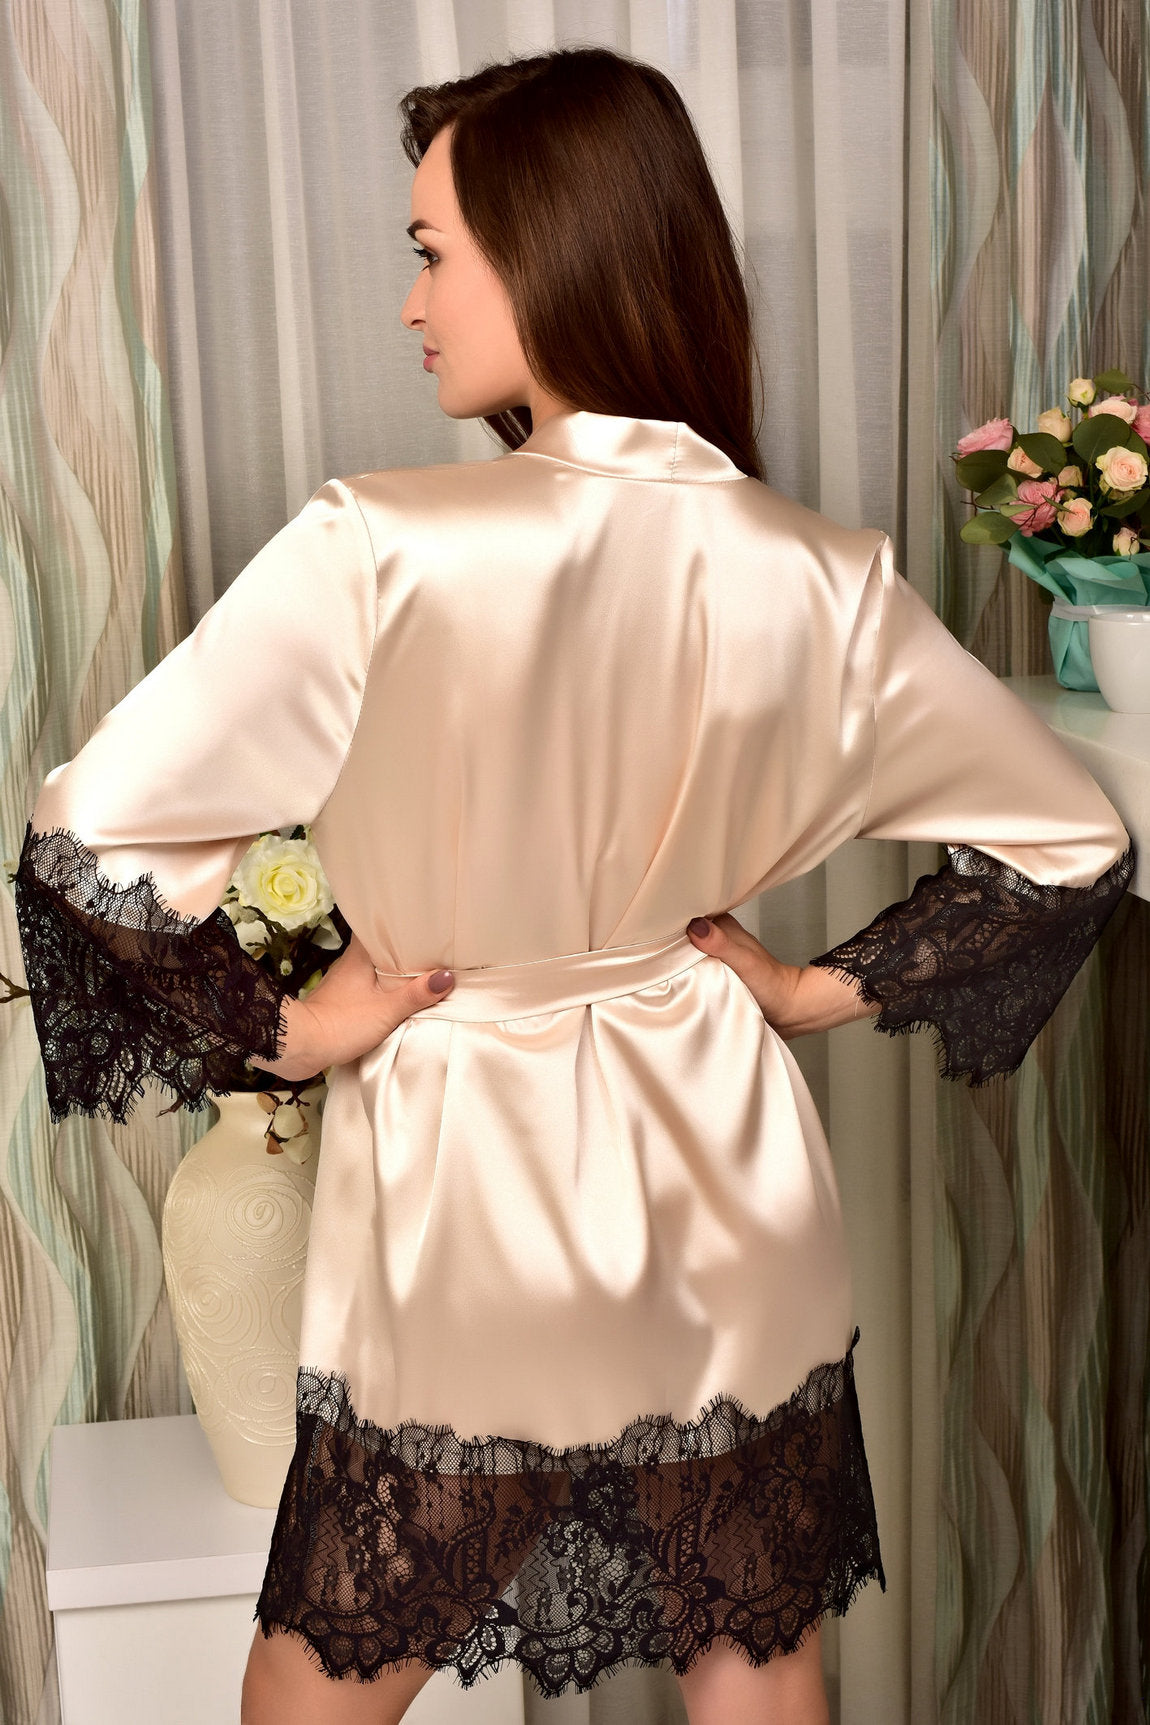 Chantilly lace trims on the sleeves and hem of the beige satin robe